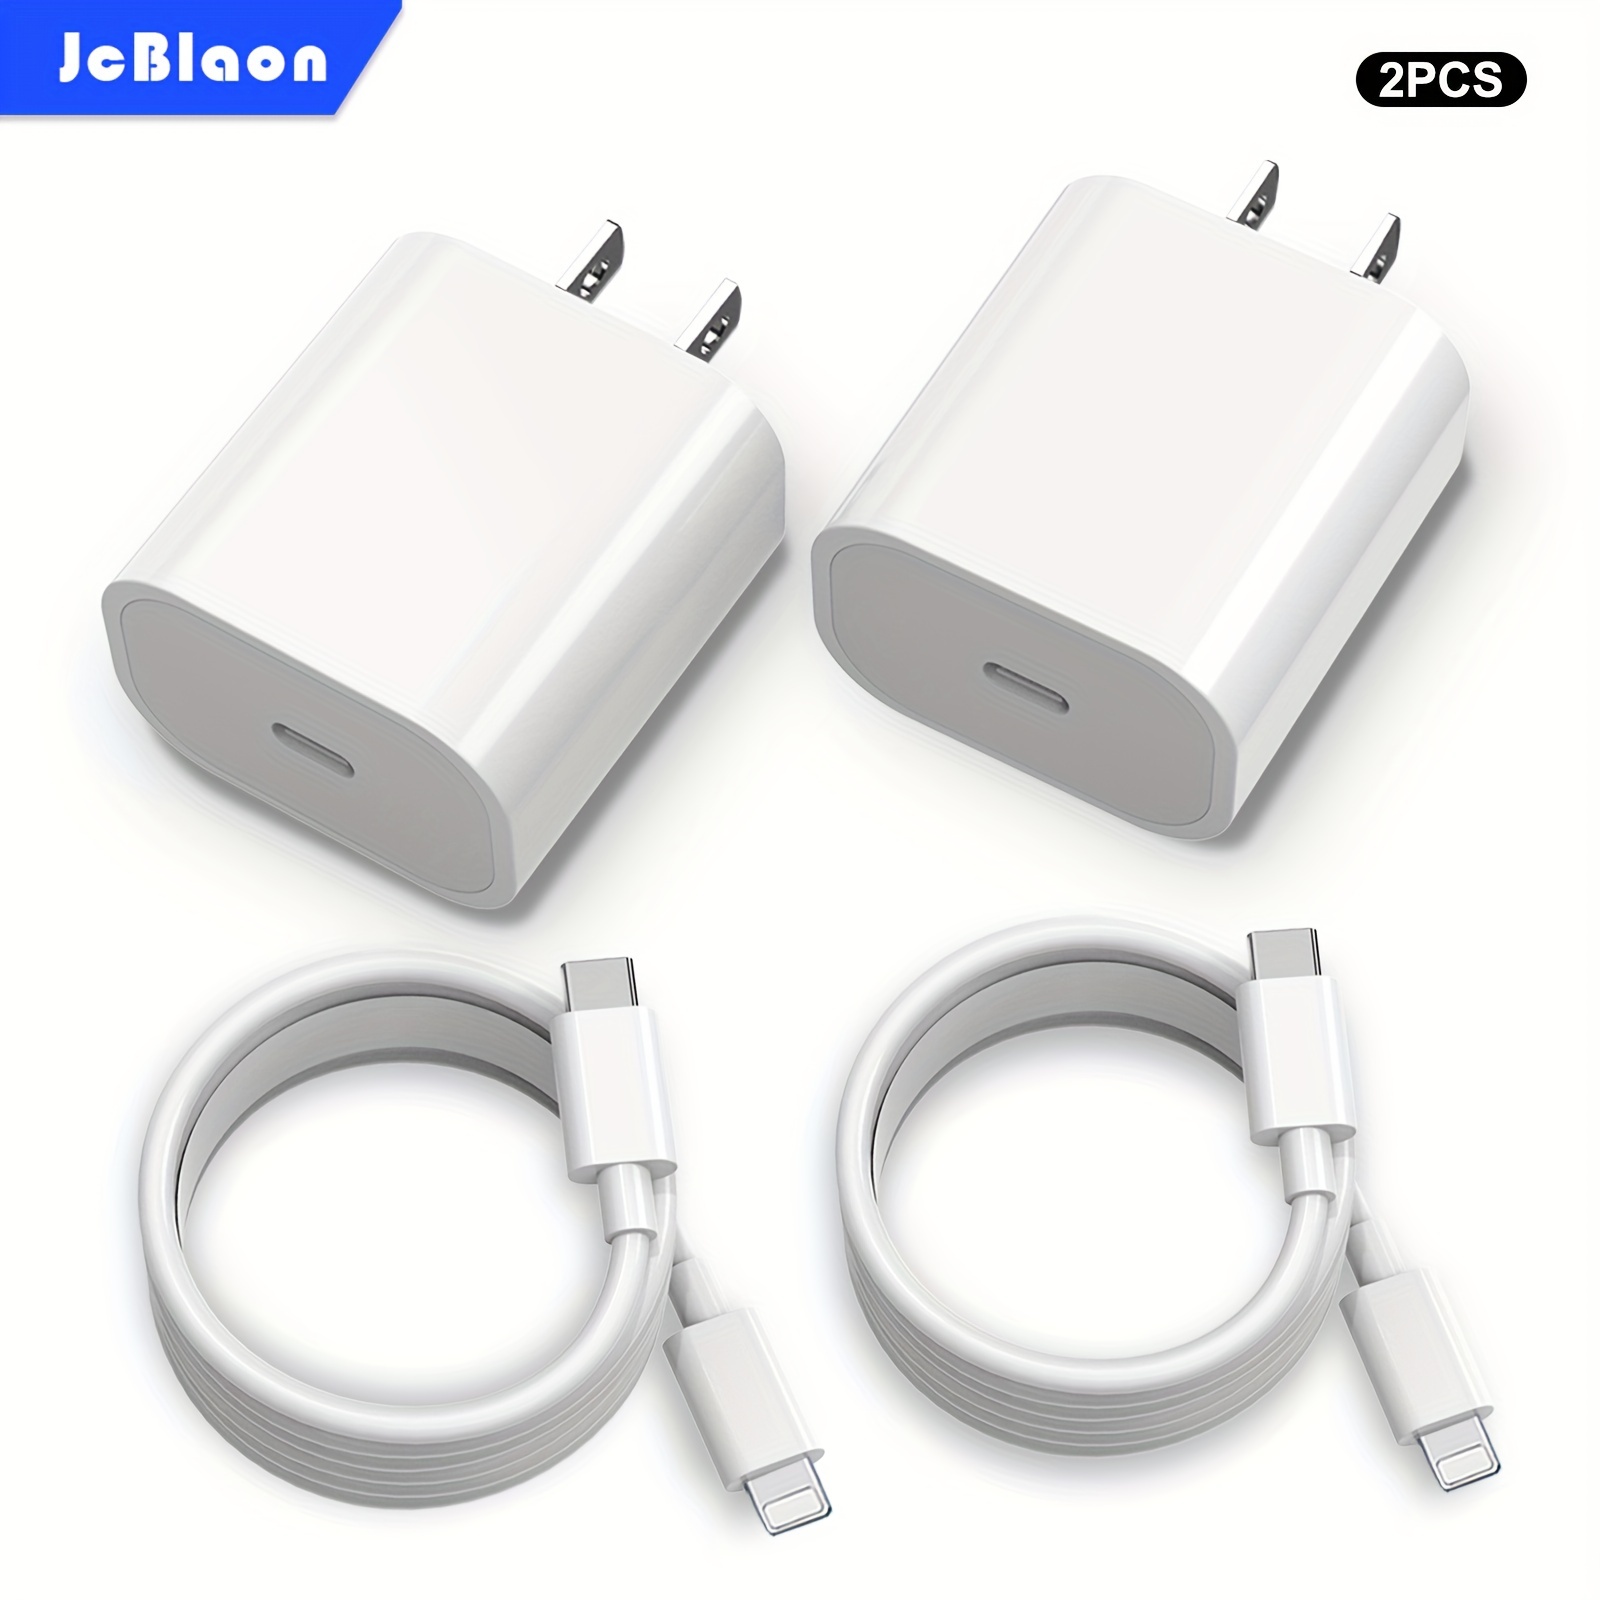 

2pcs For Iphone 14, 13, 12, 11 Fast Charger, 20w Rapid Usb C Charger With Usb C To For Iphone Charging Cable Pd Adapter